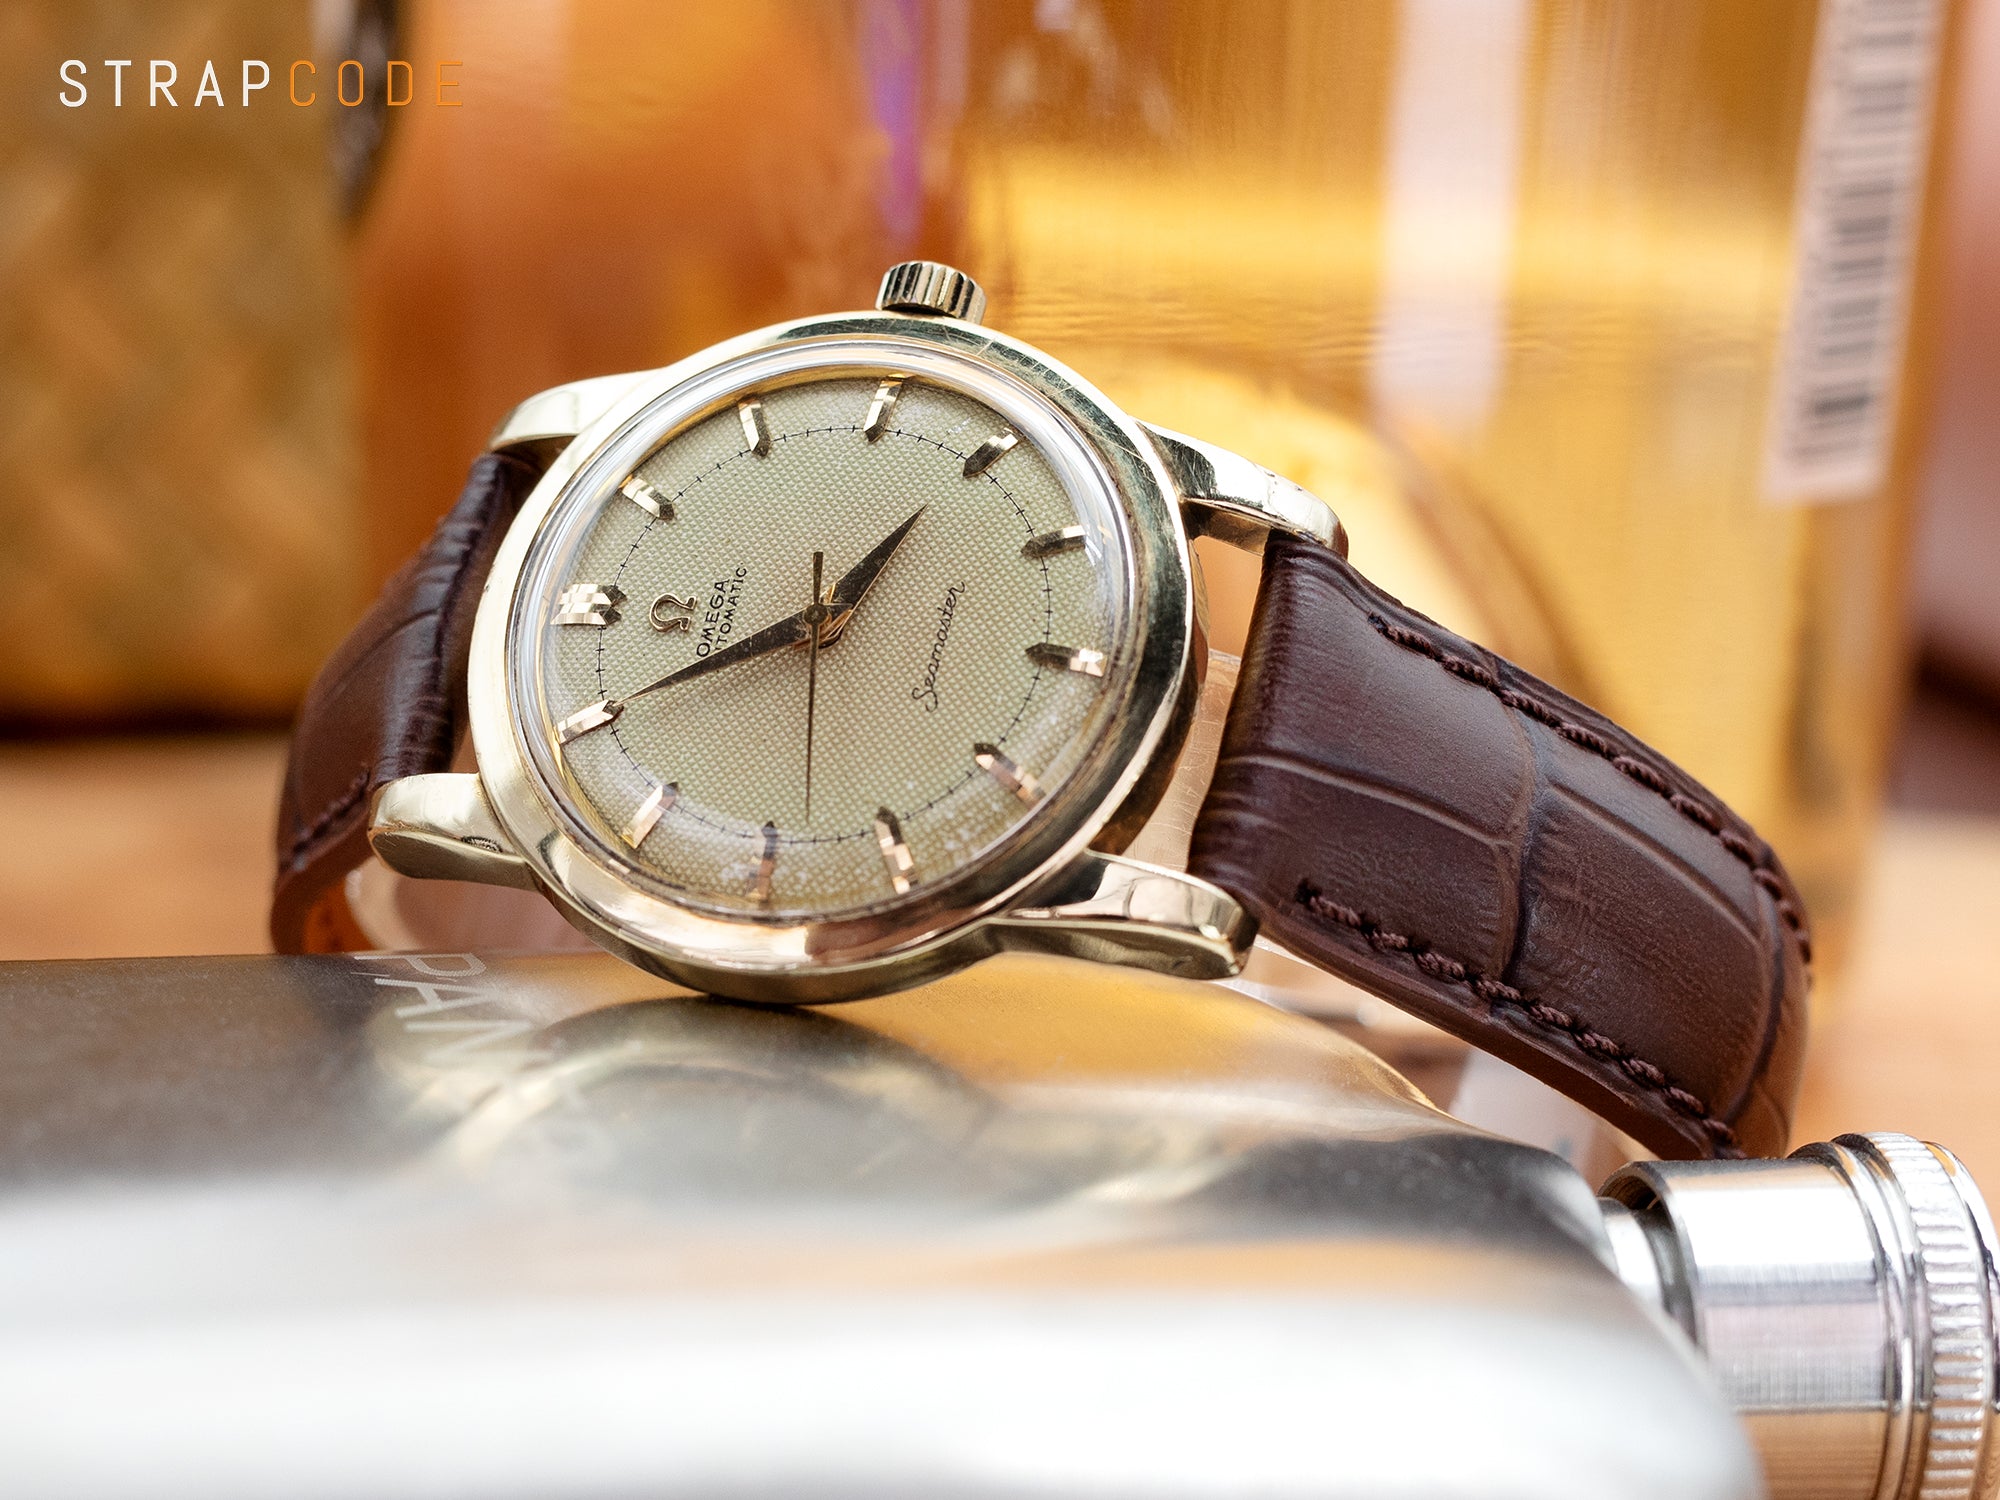 1952 Omega Gold Capped Seamaster with Bumper Caliber 354 Crocodile Grain watch bands by Strapcode